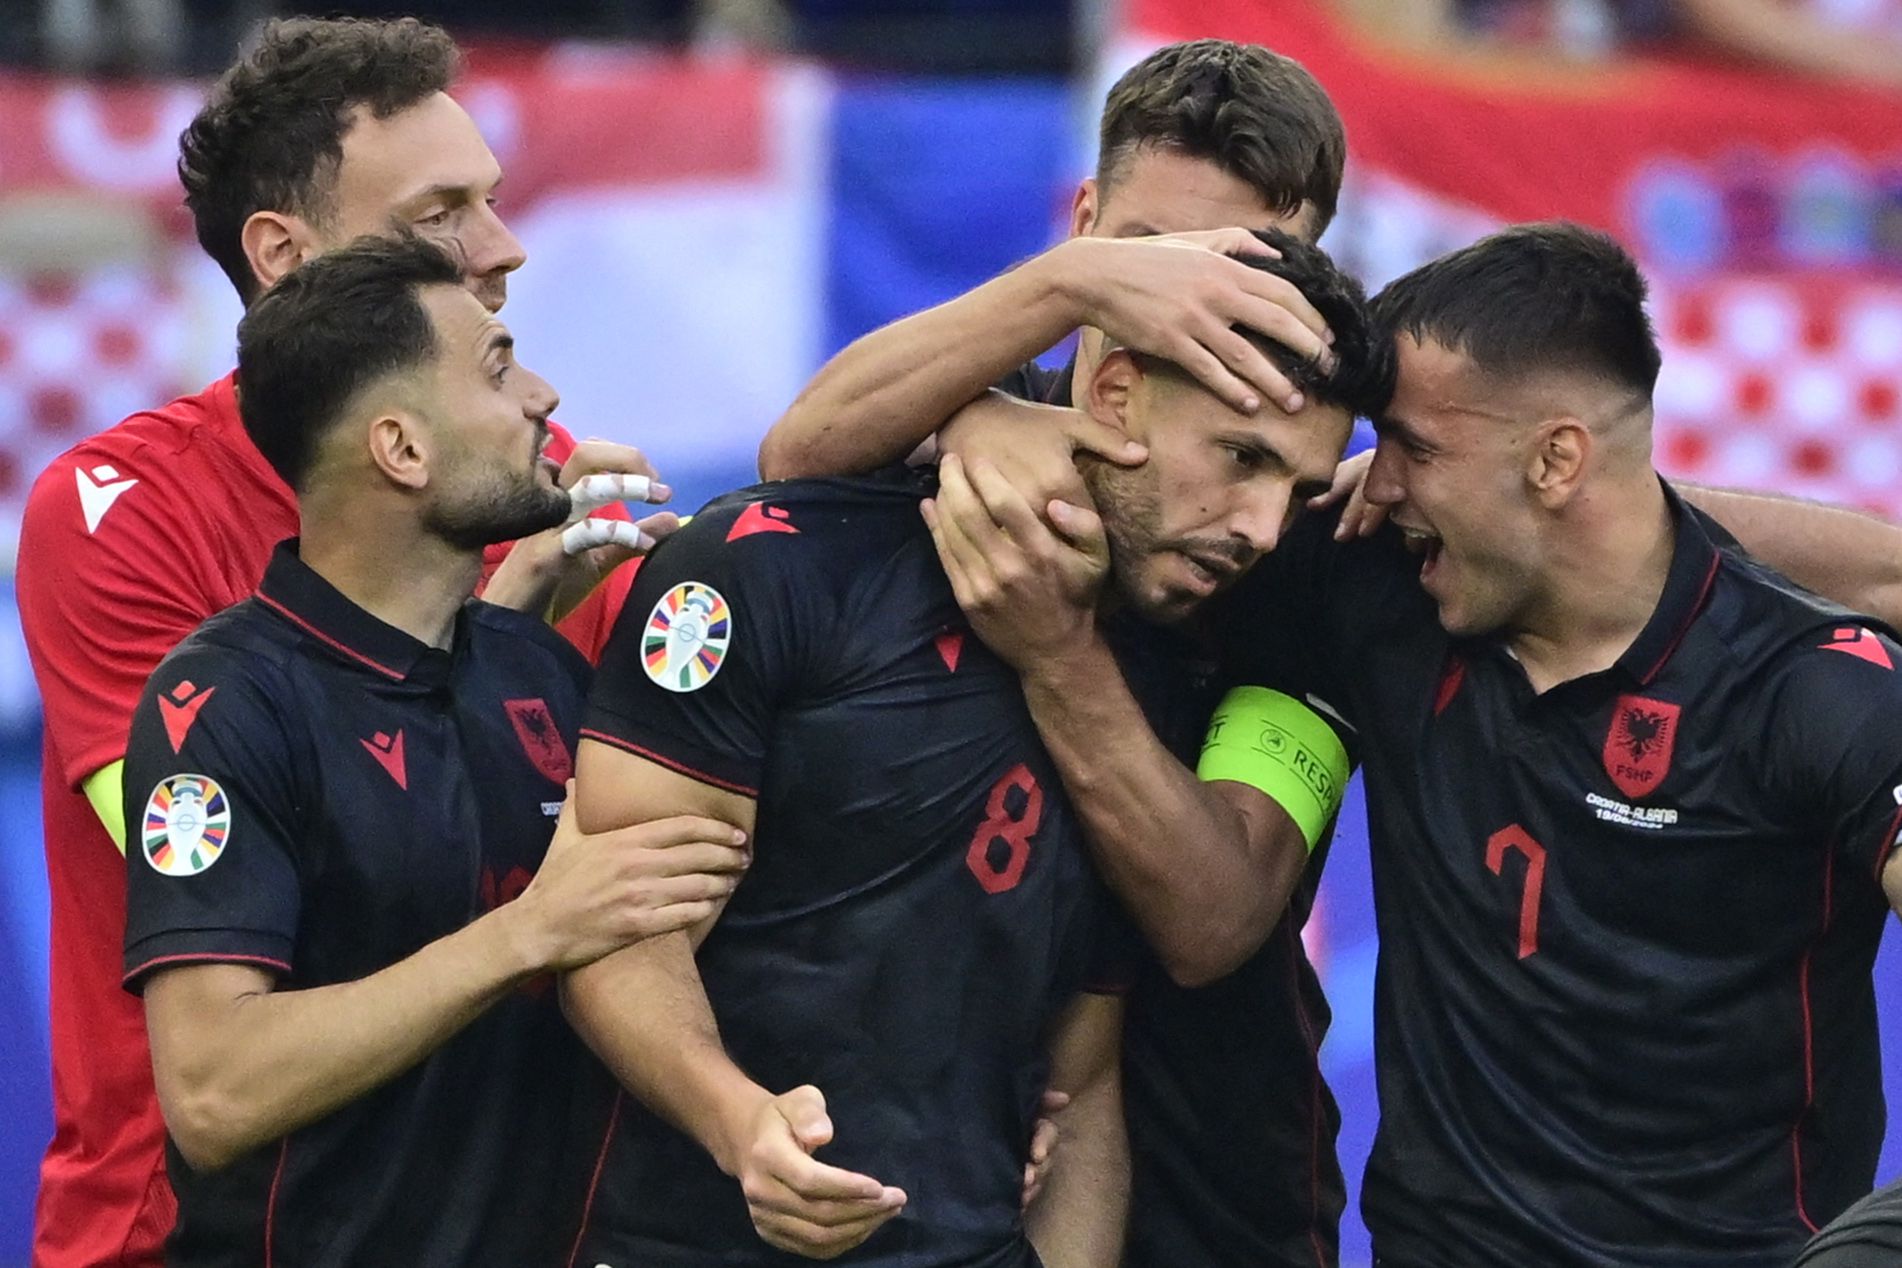 Albania's midfielder #08 Klaus Gjasula celebrates with his team mates after scoring the equalising goal 2:2 during the UEFA Euro 2024 Group B football match between Croatia and Albania at the Volksparkstadion in Hamburg on June 19, 2024. (Photo by JOHN MACDOUGALL / AFP)